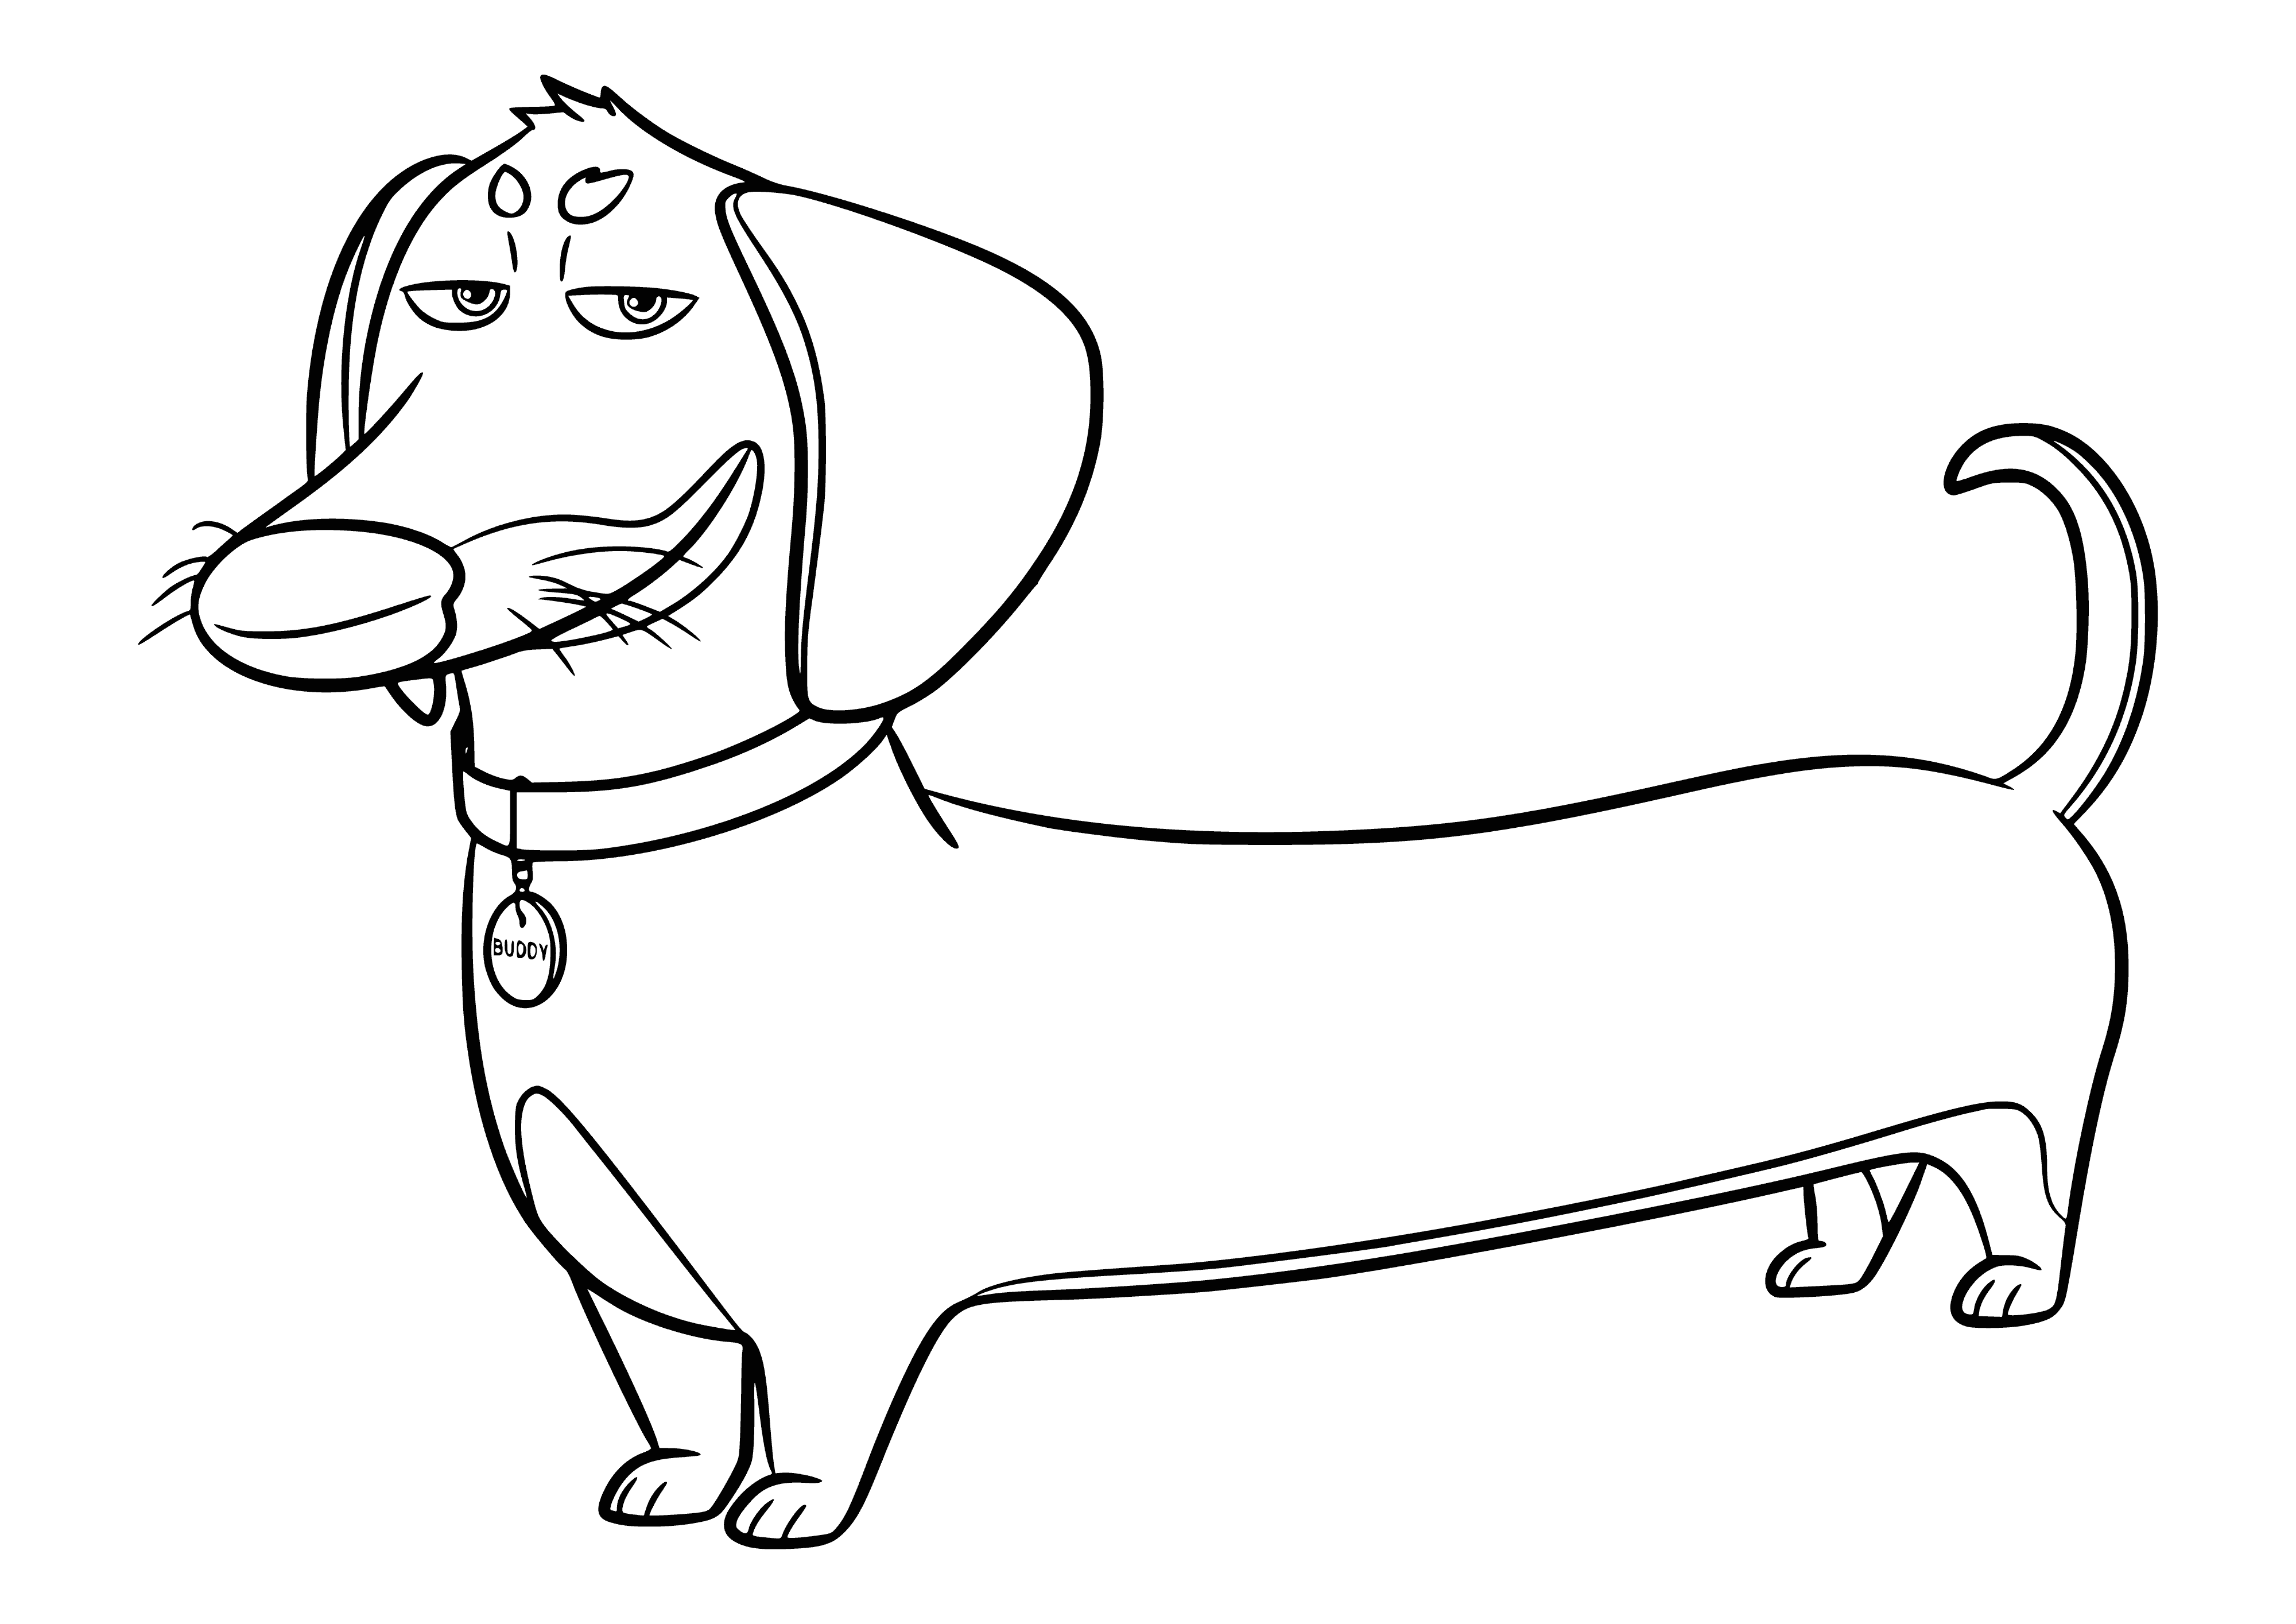 Buddy fee coloring page